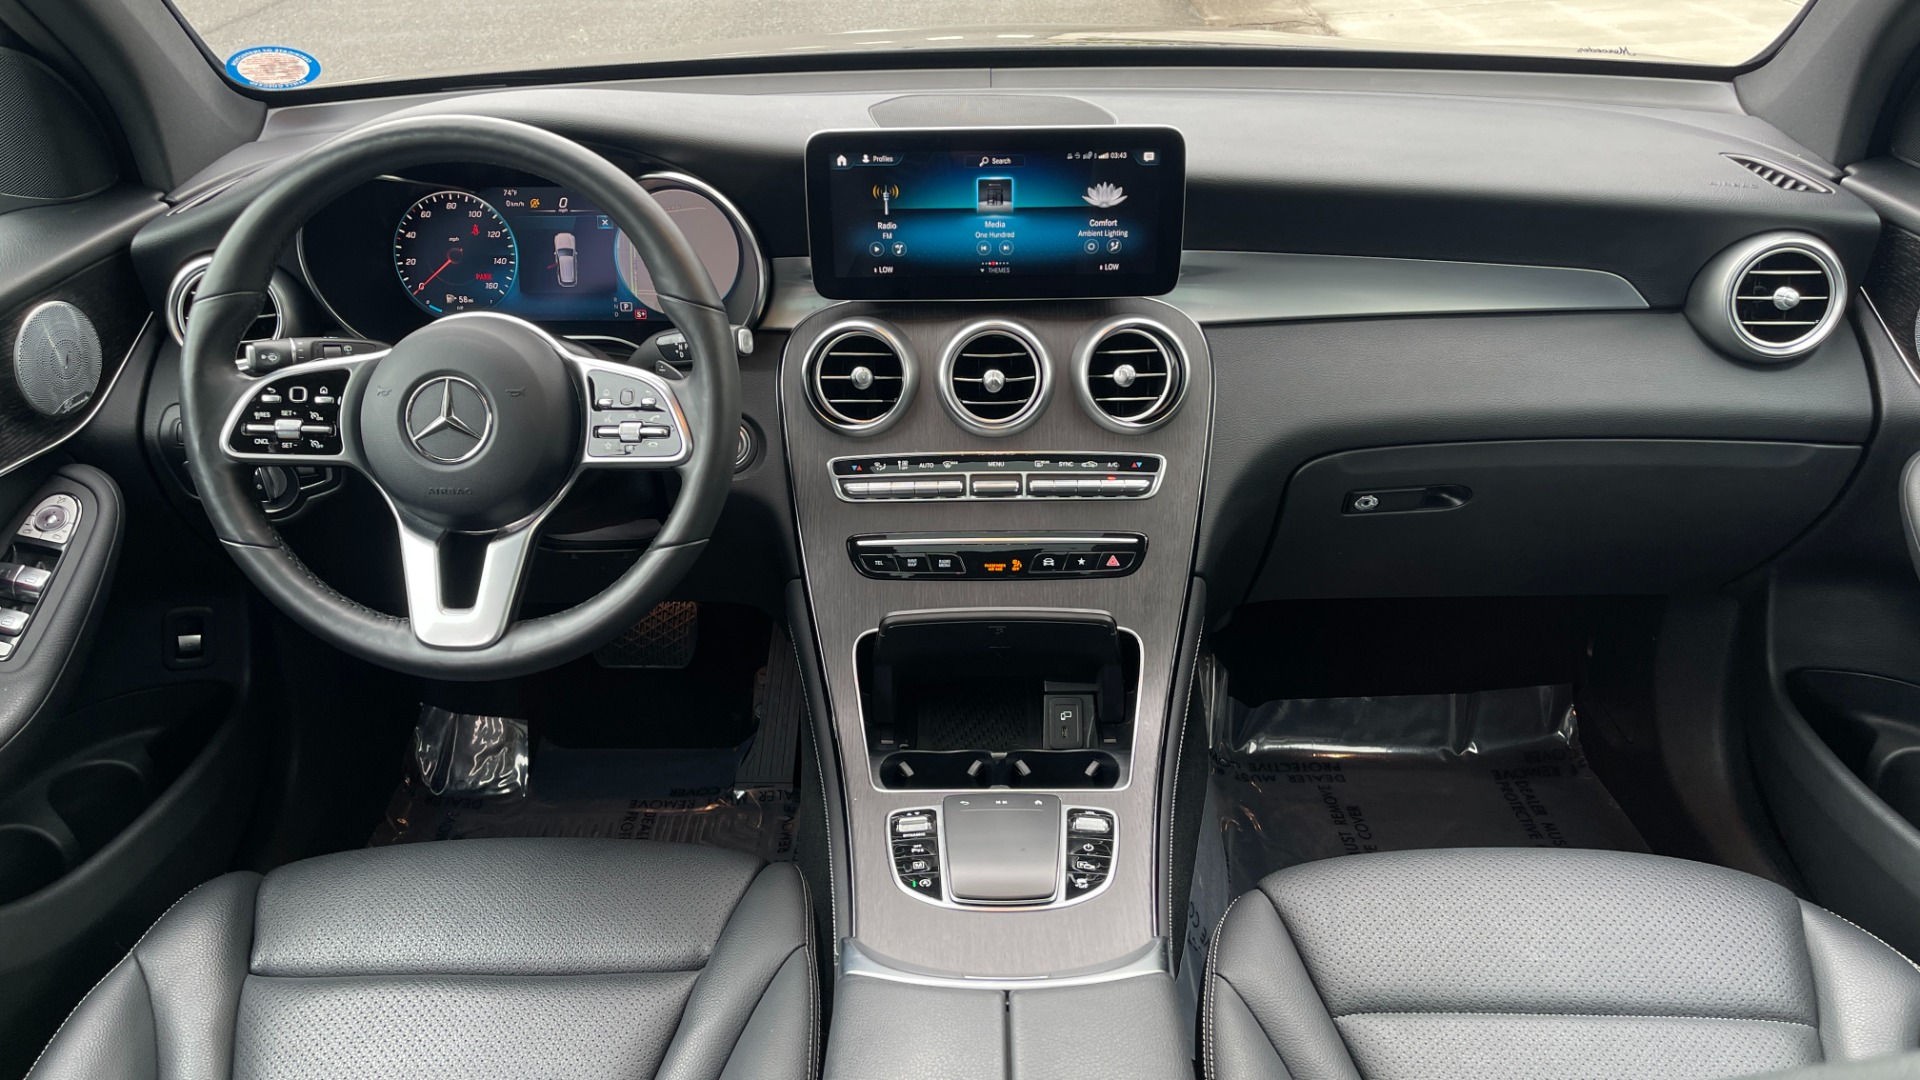 Used 2021 Mercedes-Benz GLC GLC 300 / 4MATIC / DASHCAM / PANORAMIC ROOF / WIRELESS CHARING / PREMIUM for sale $44,995 at Formula Imports in Charlotte NC 28227 11